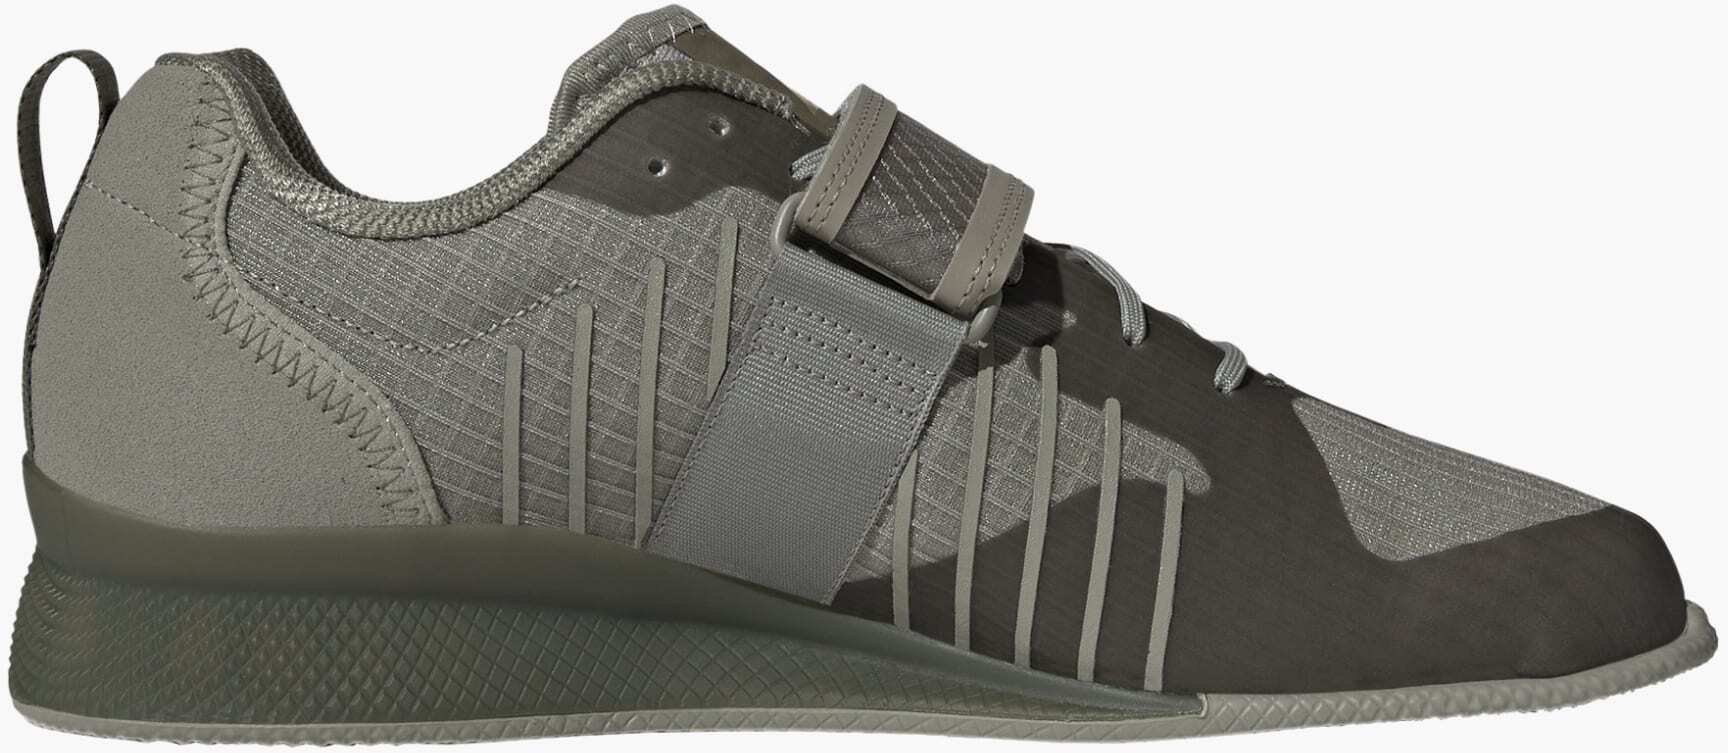 Adidas Adipower III Weightlifting Shoes right side